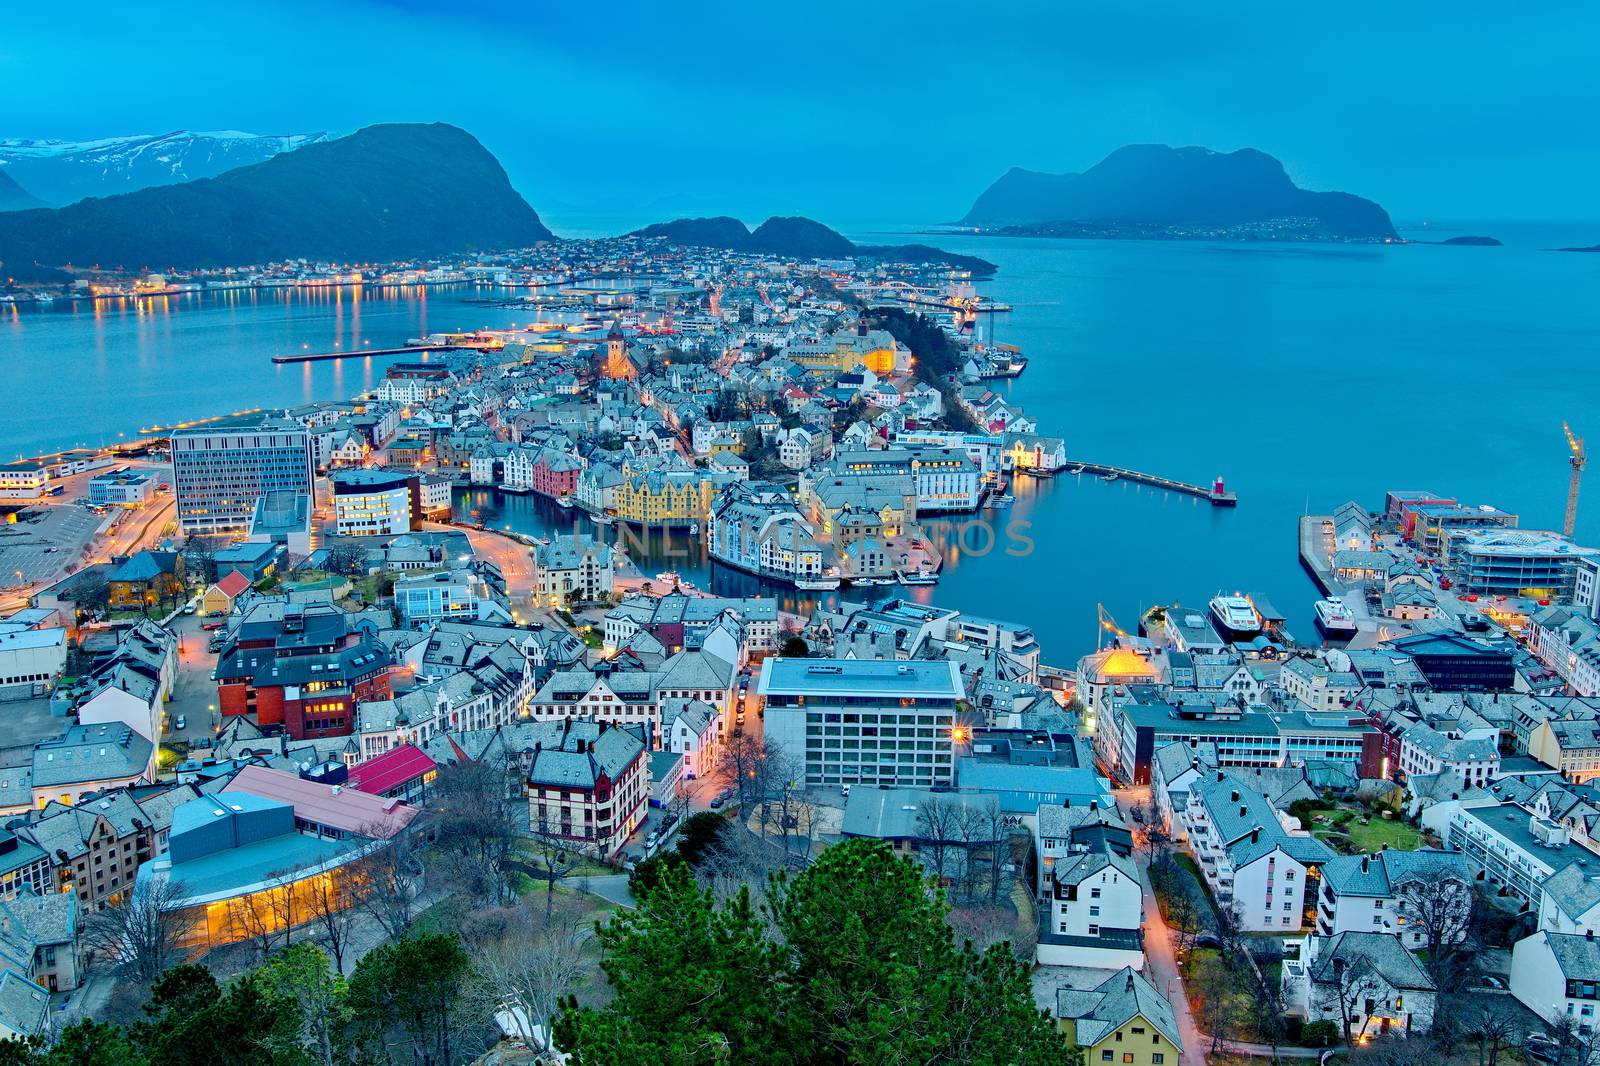 City of Alesund in Norway by anderm